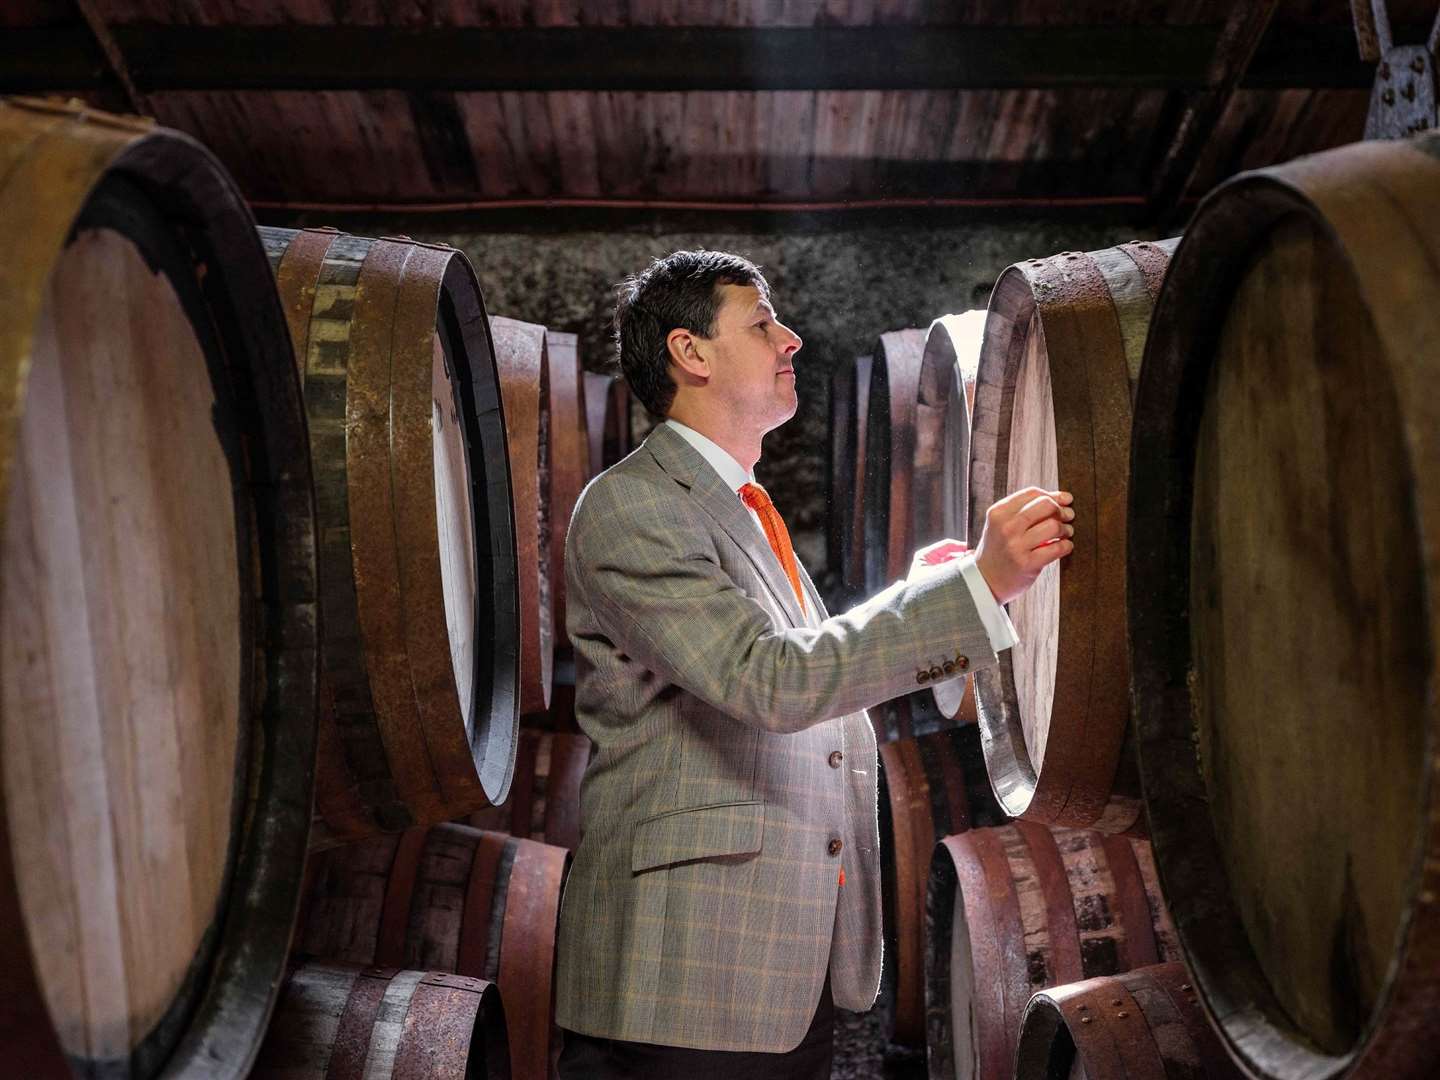 Glenmorangie's head of distilling and whisky creation Bill Lumsden samples a prize-winning dram.